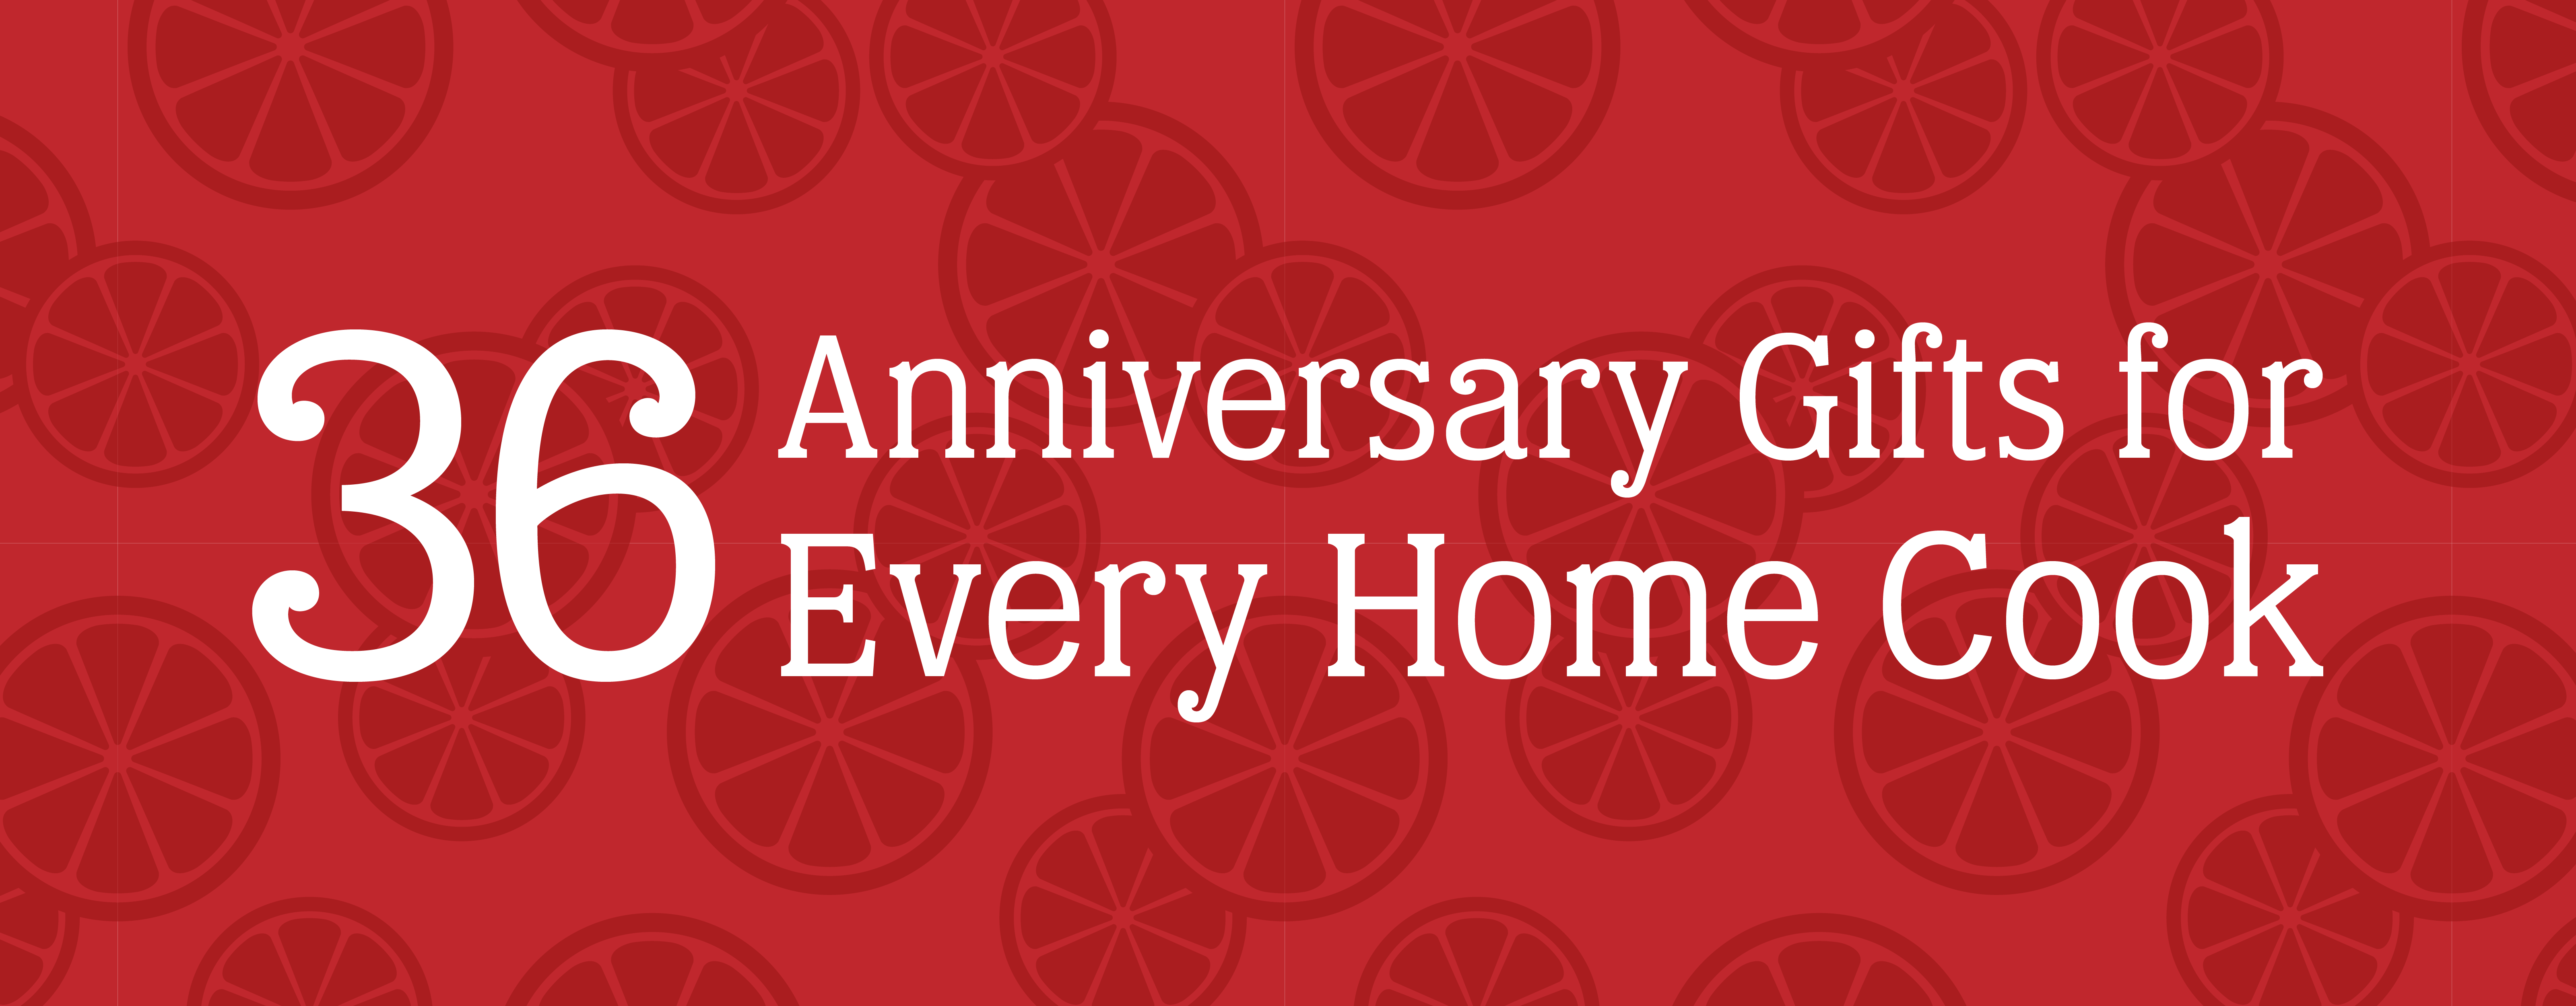 Featured Image for Anniversary Gifts for Every Home Cook